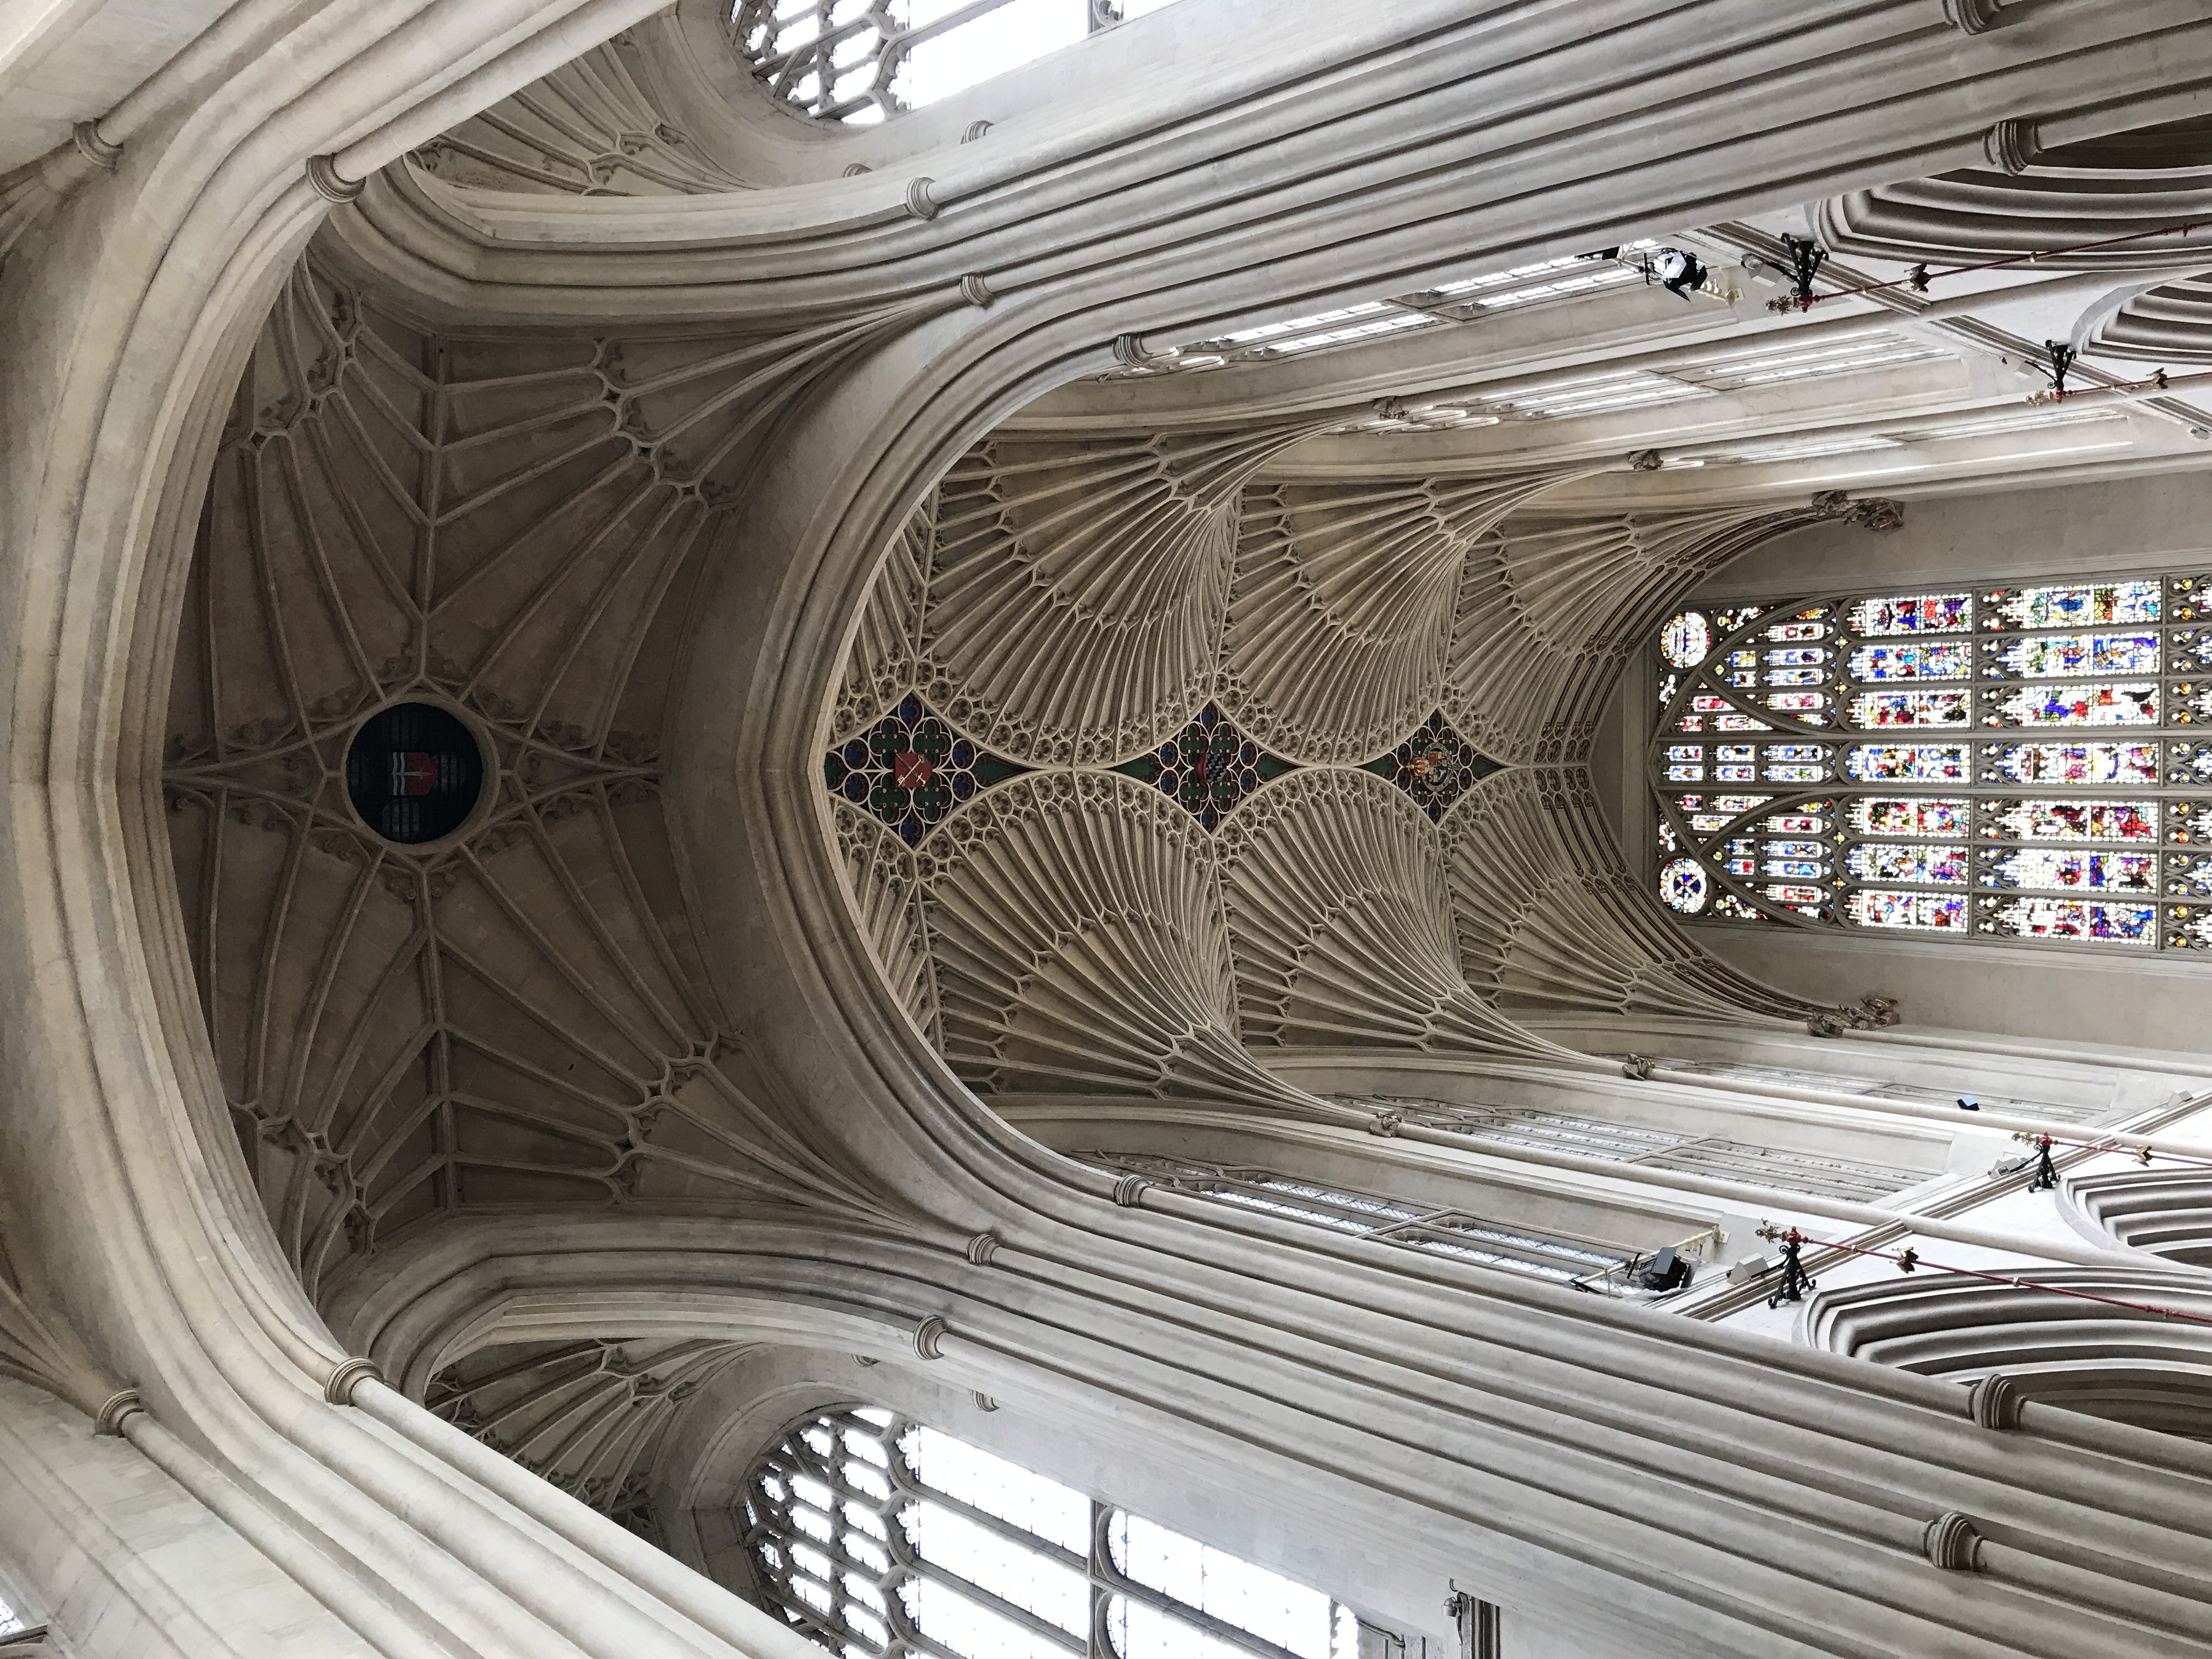 The magnificent vaulted ceiling of the nave at Bath Abbey, England